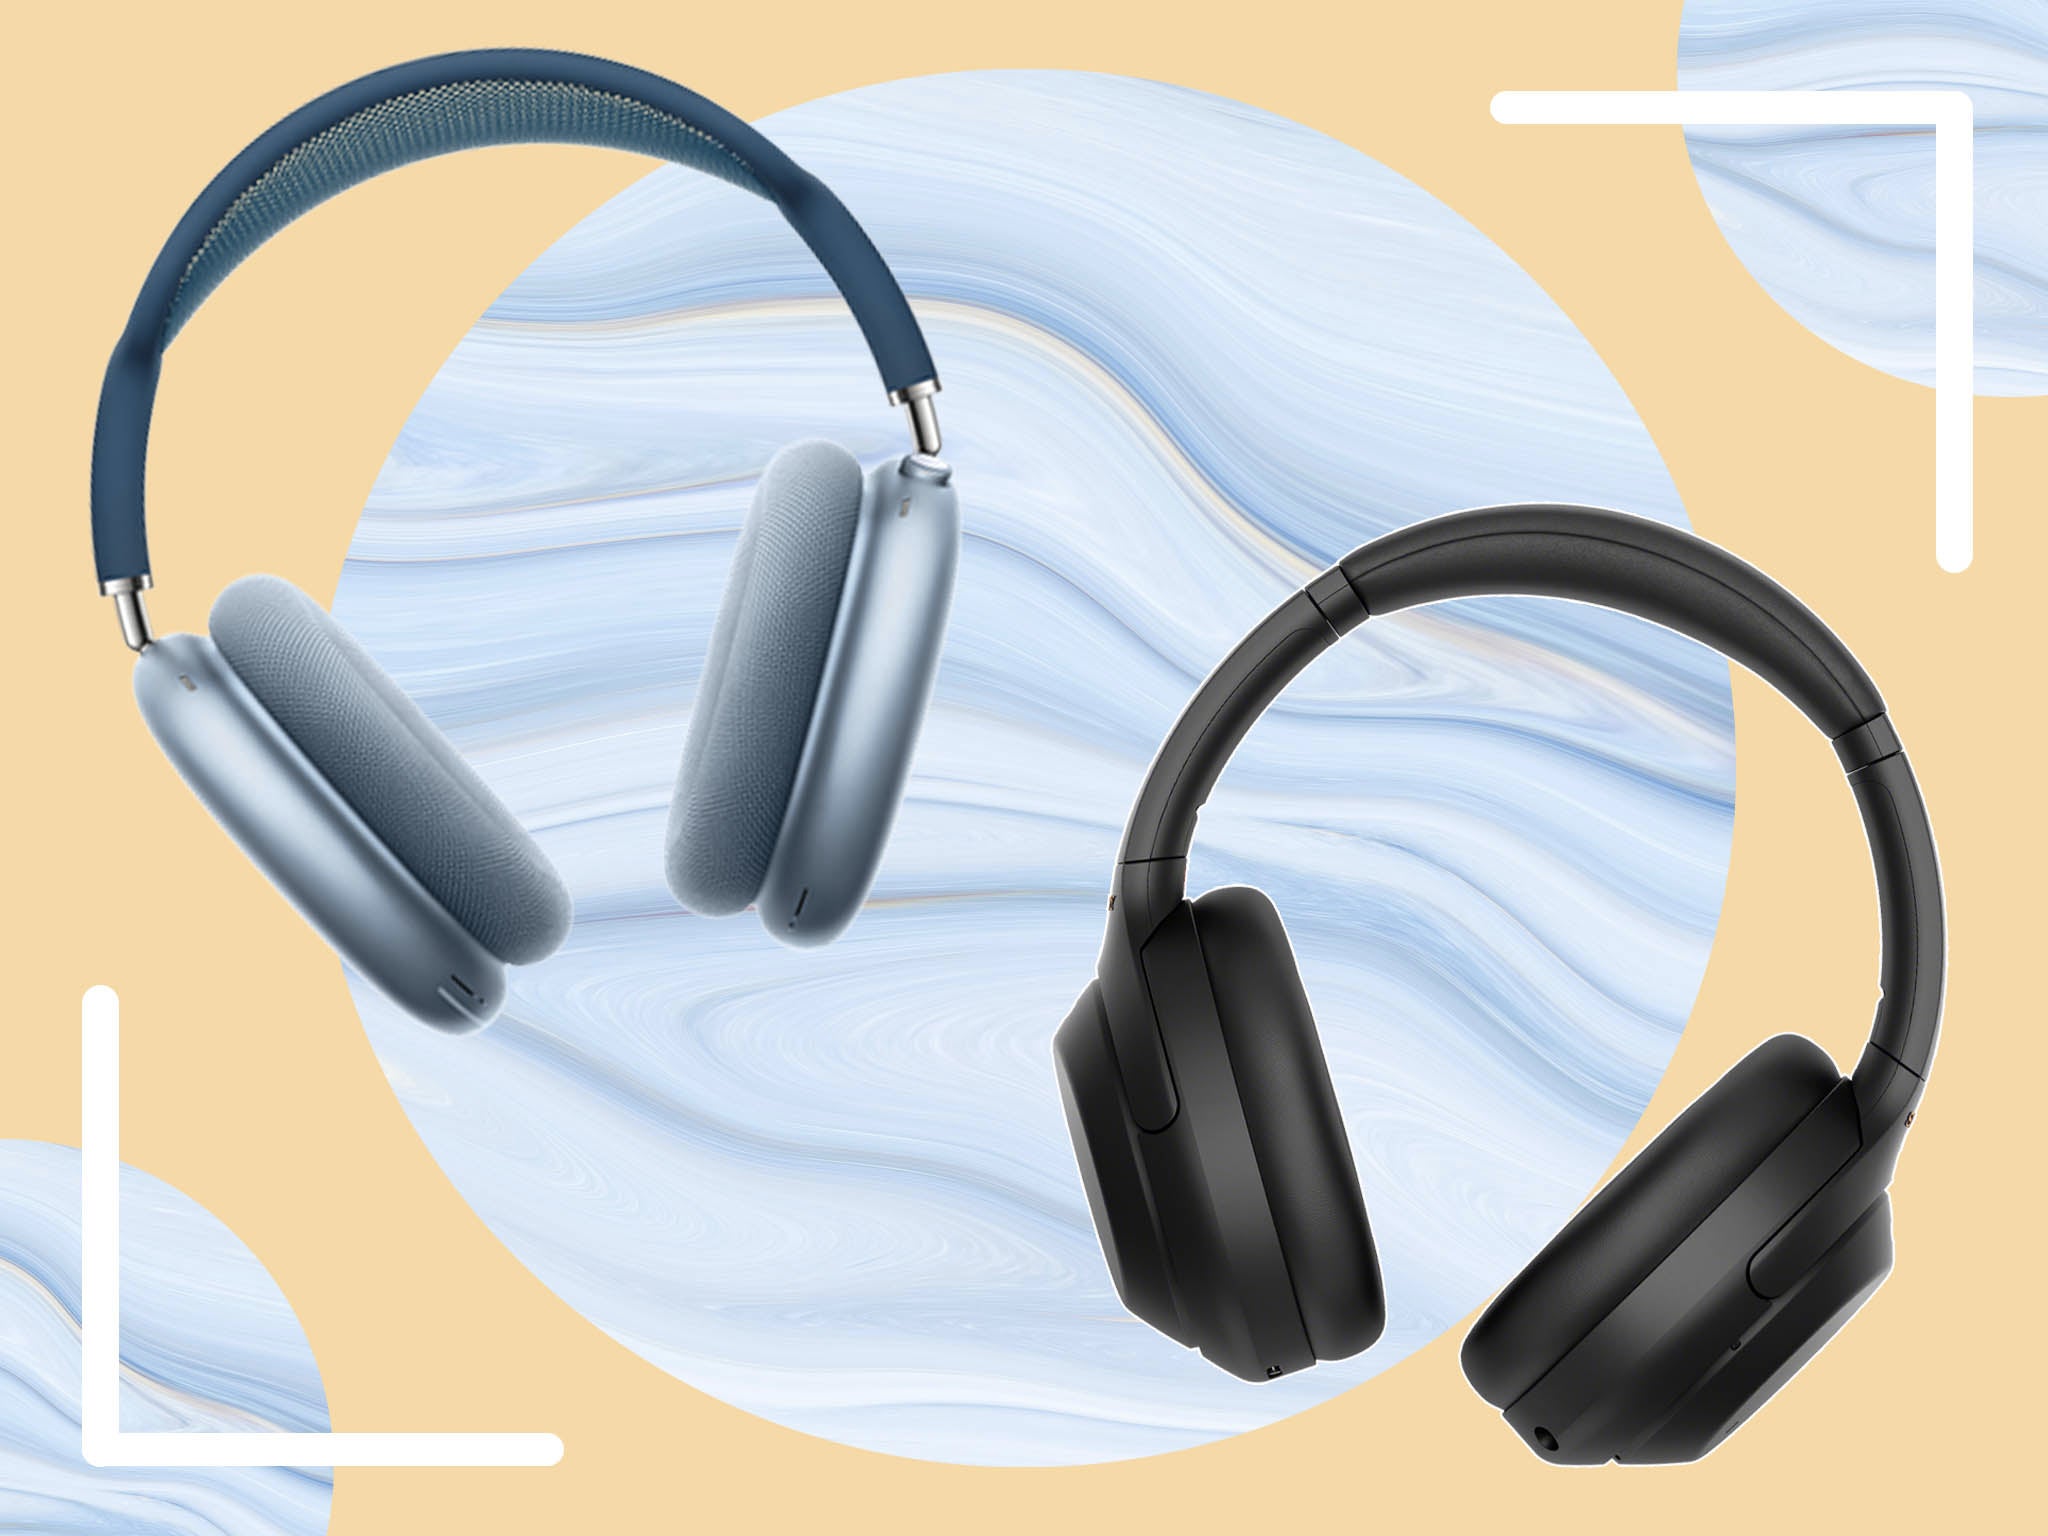 We tested noise cancelling ability, sound quality, comfort and design